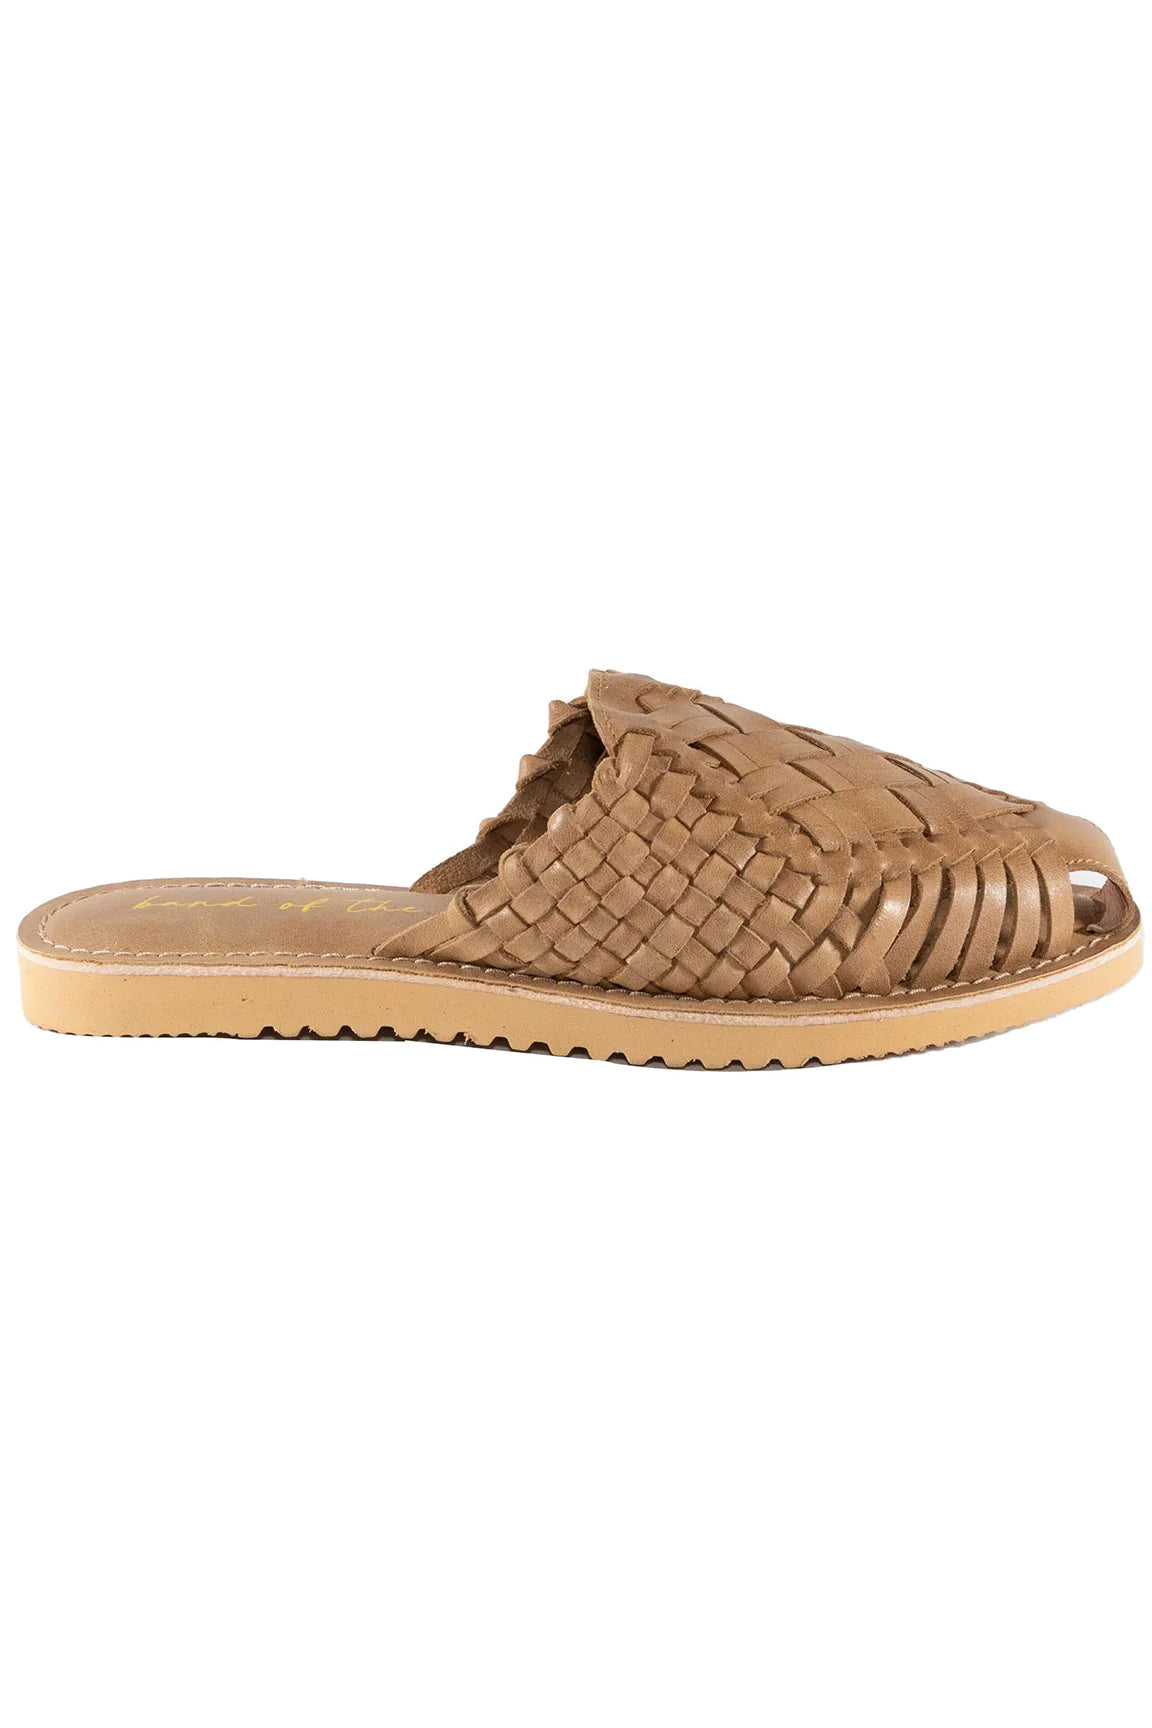 Comet Leather Woven Mule